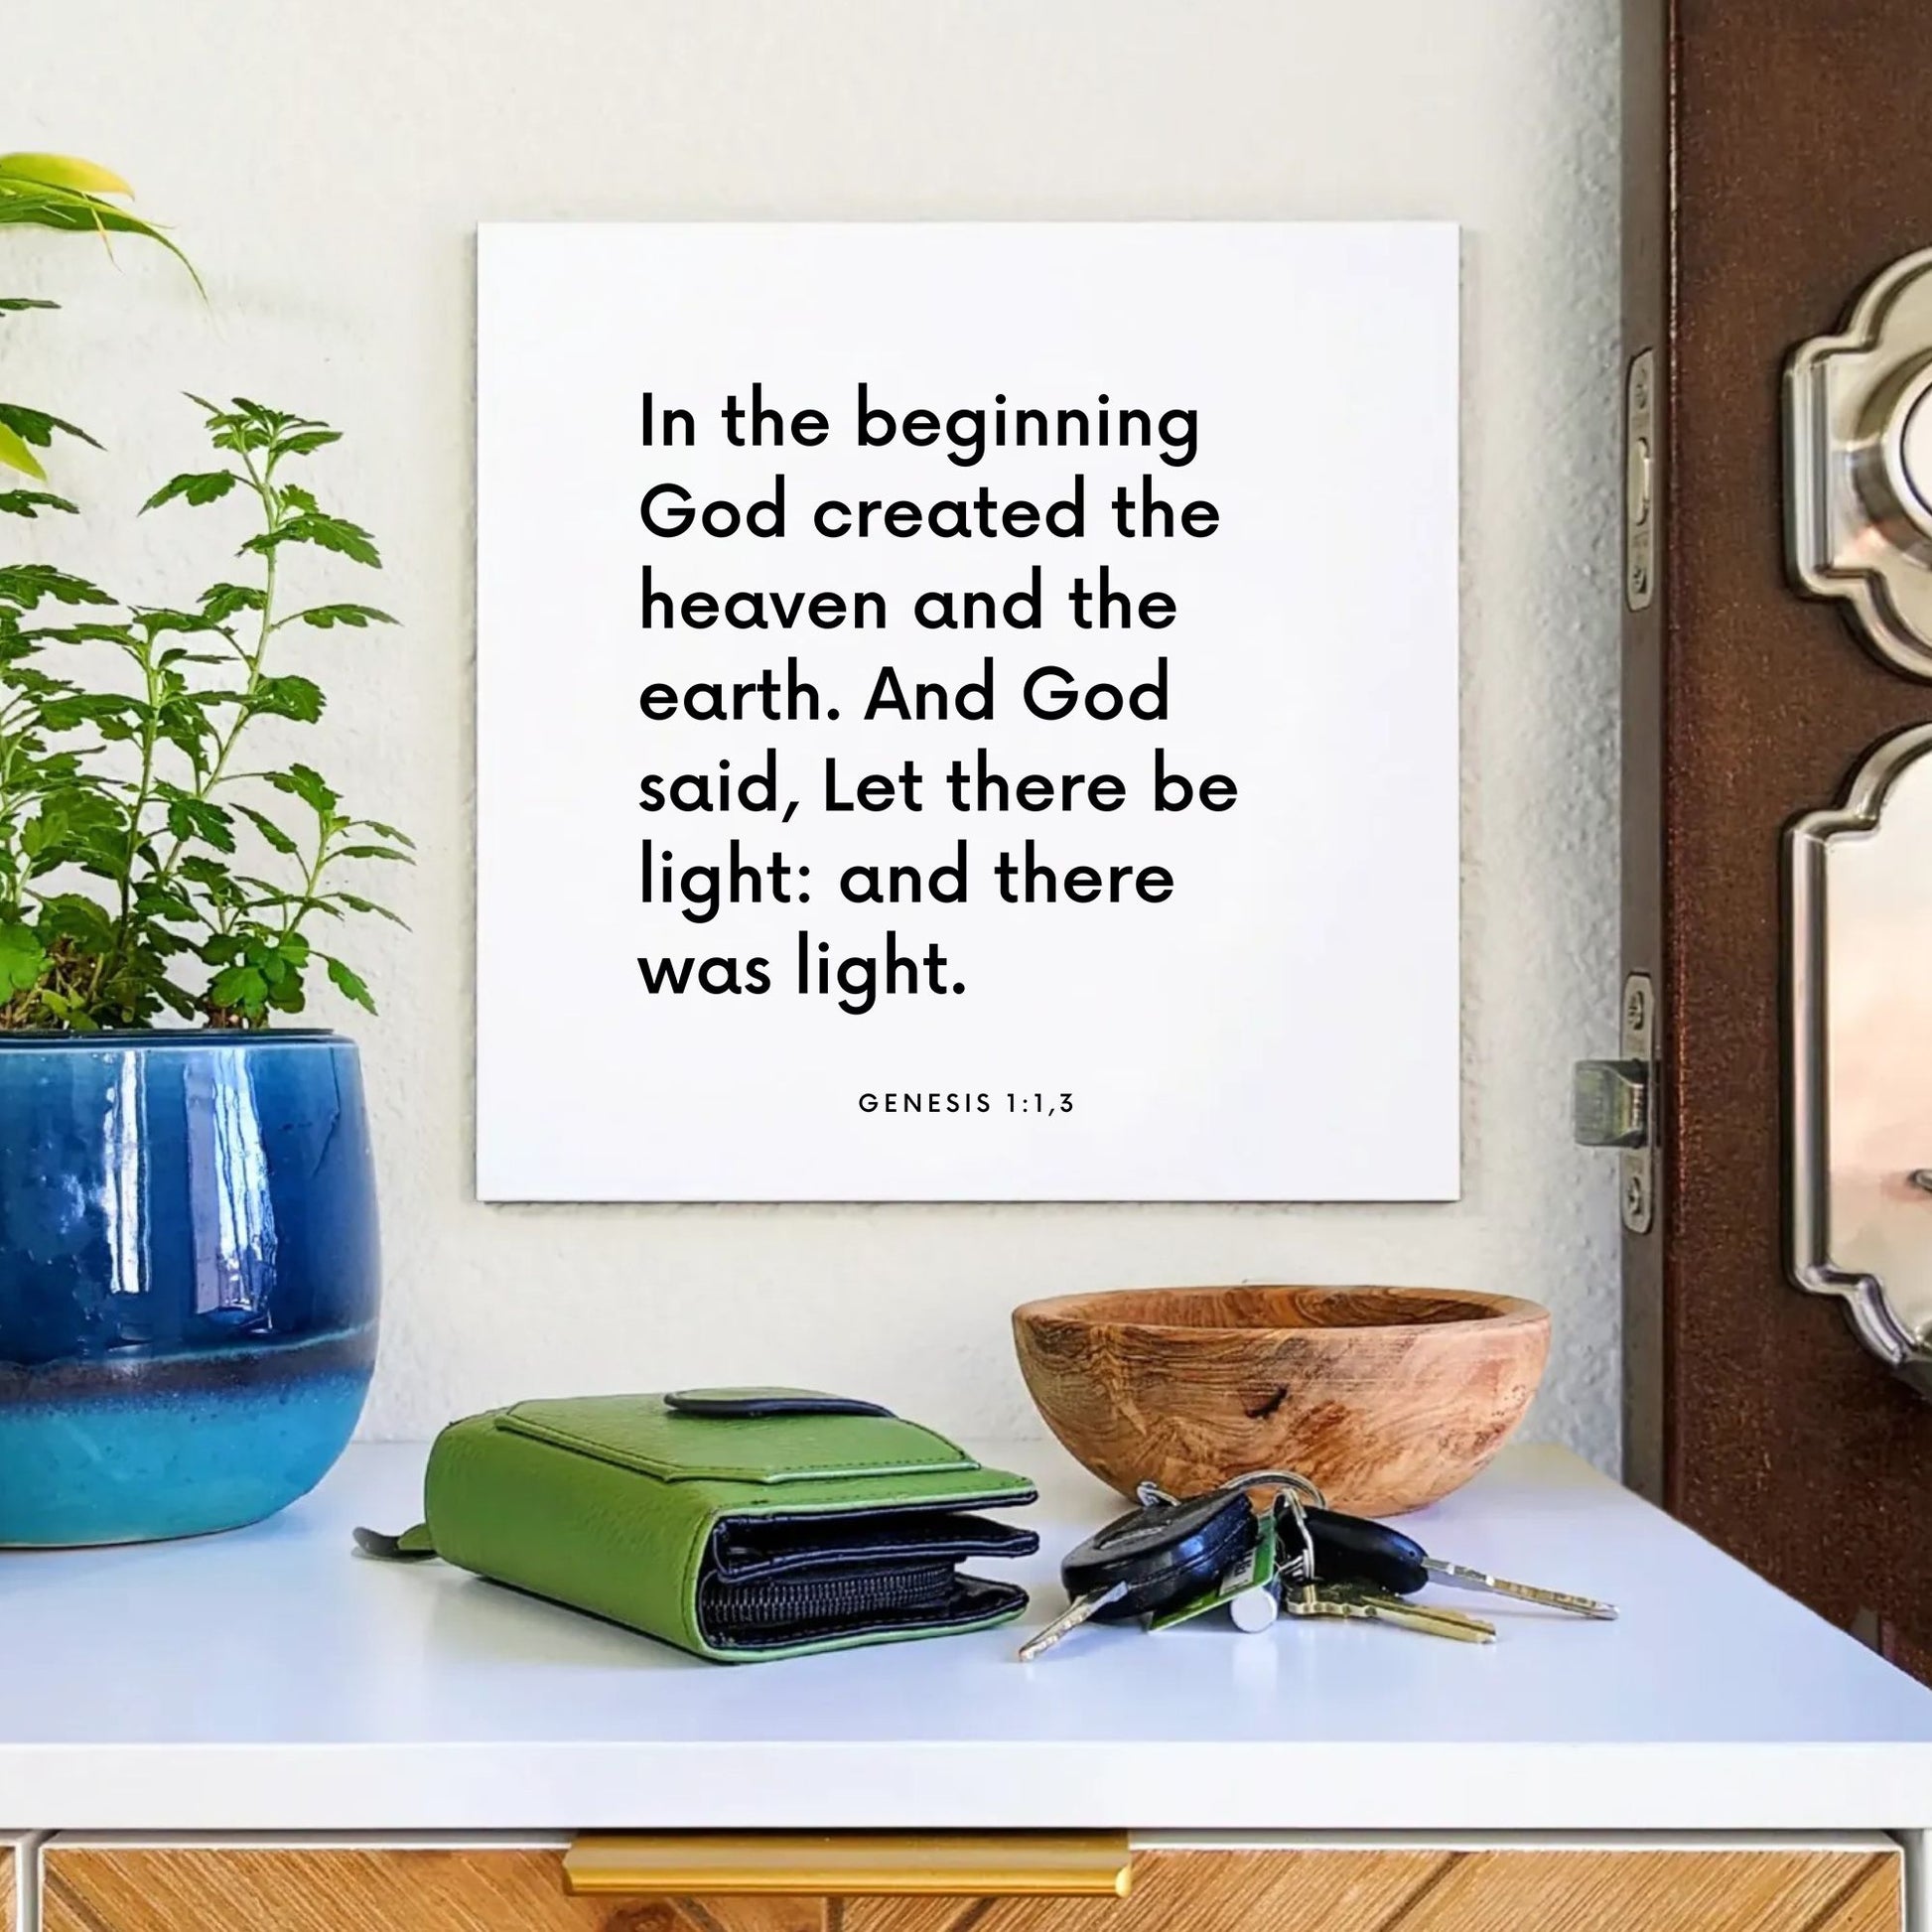 Entryway mouting of the scripture tile for Genesis 1:1,3 - "And God said, Let there be light"